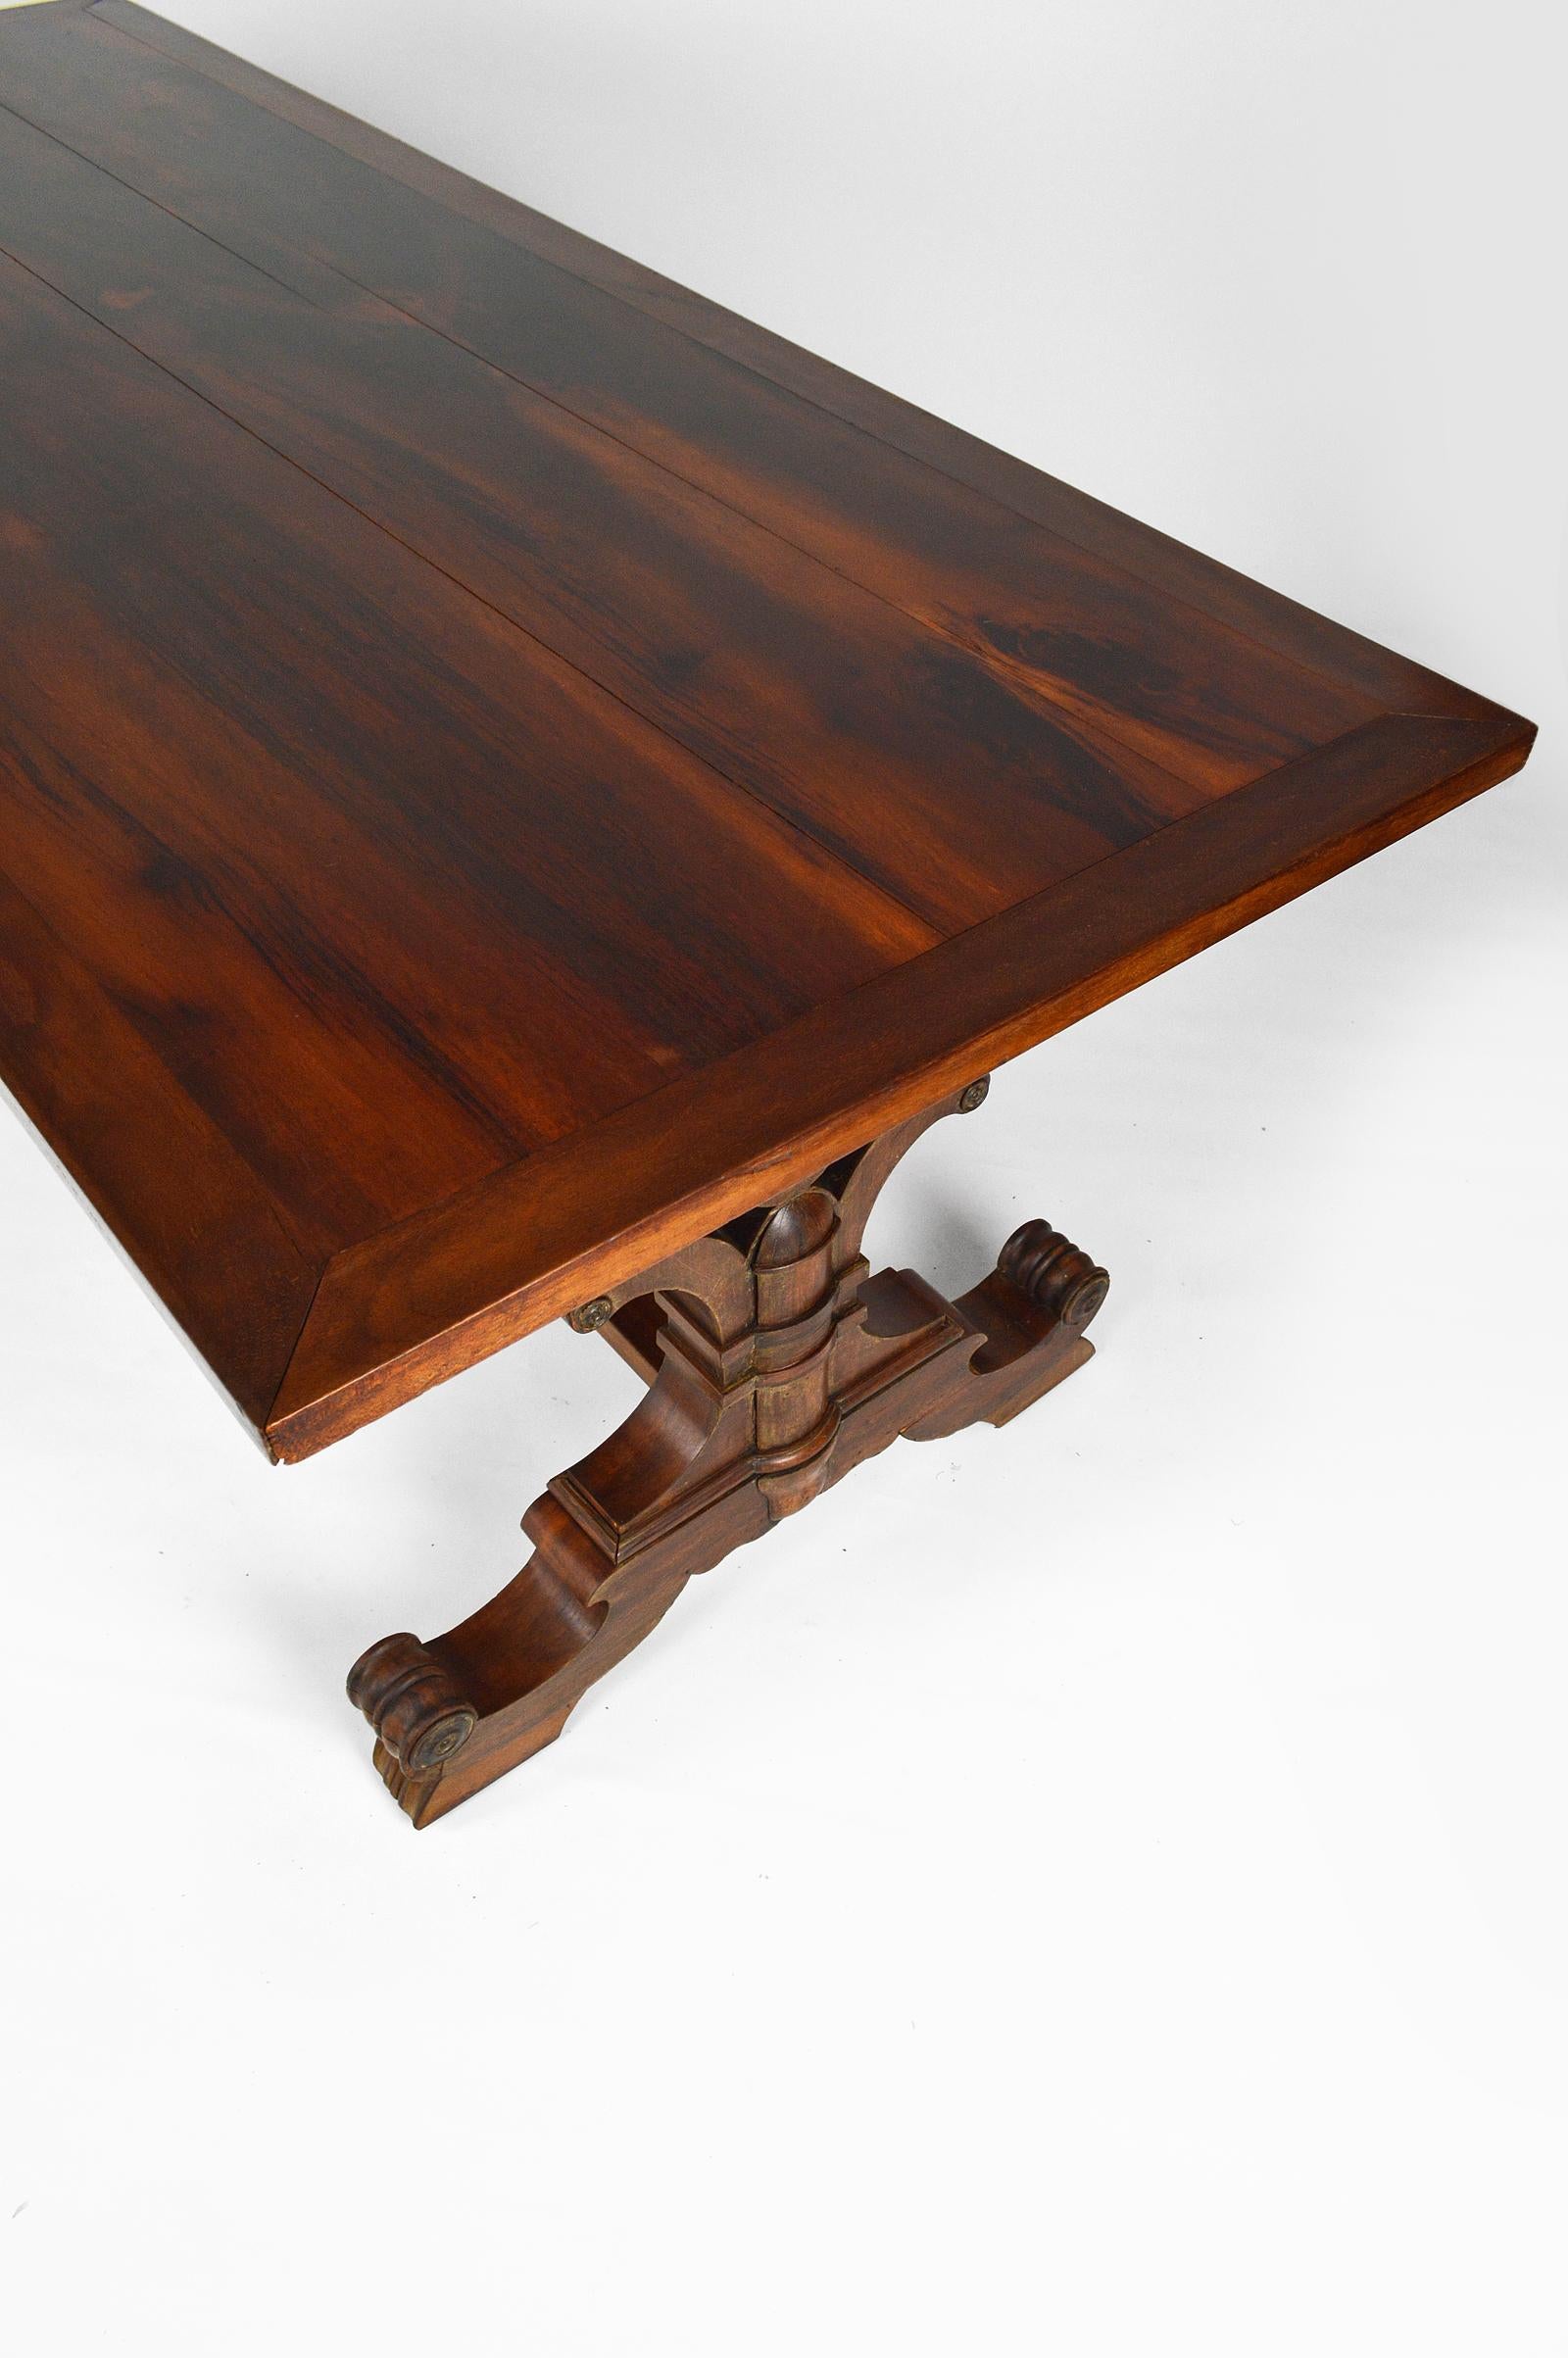 British Gothic Revival Dining Table in Mahogany, Victorian Era, circa 1840 For Sale